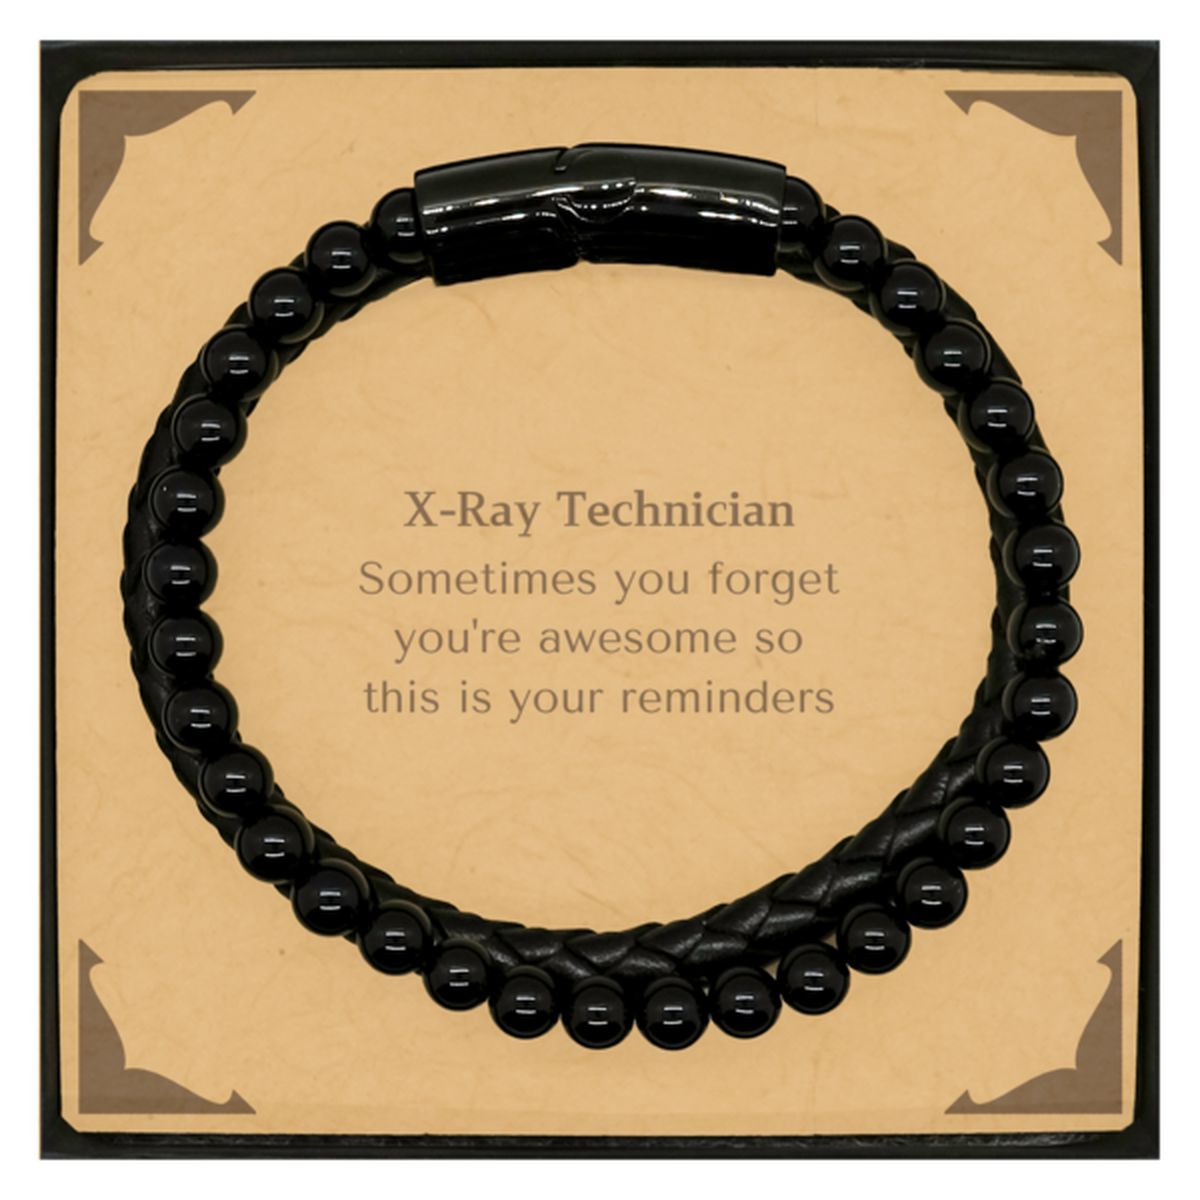 Sentimental X-Ray Technician Stone Leather Bracelets, X-Ray Technician Sometimes you forget you're awesome so this is your reminders, Graduation Christmas Birthday Gifts for X-Ray Technician, Men, Women, Coworkers